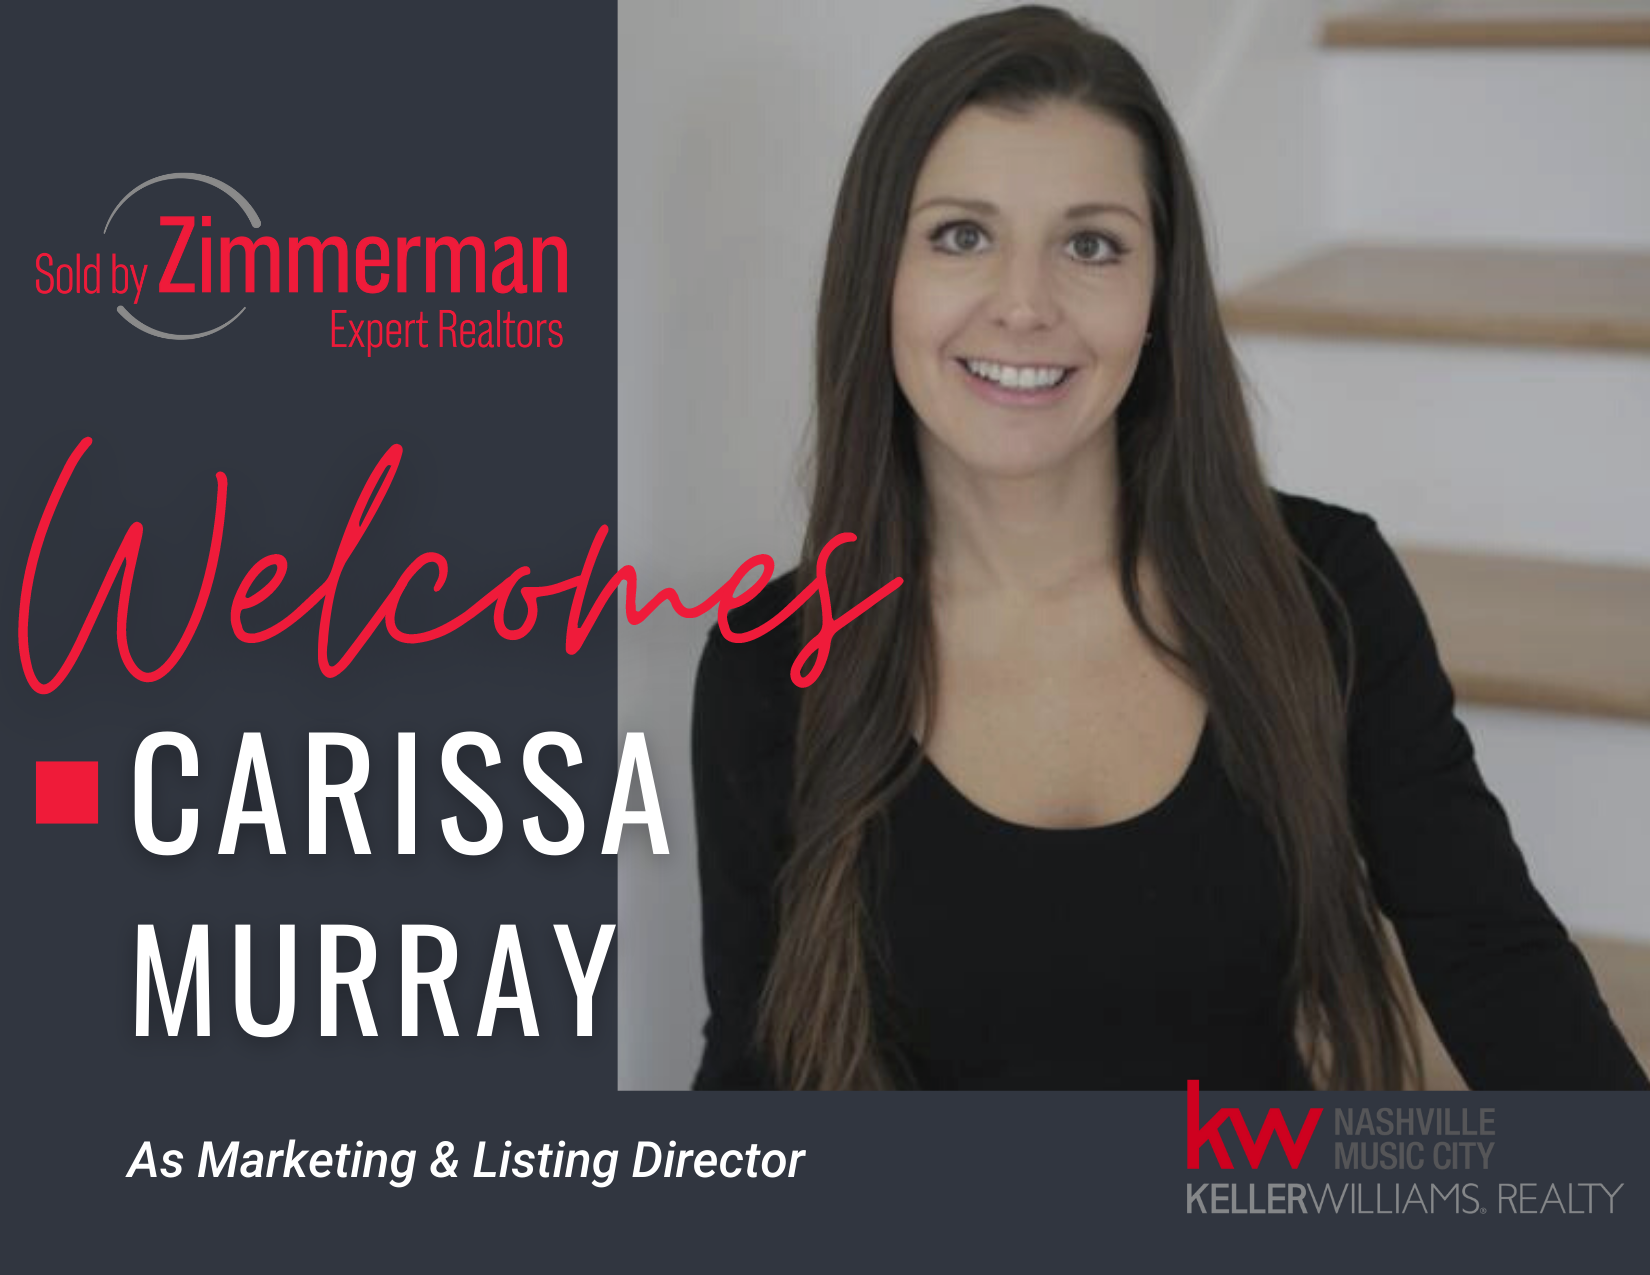 Top Real Estate Team, Sold By Zimmerman, Appoints Carissa Biele- Murray as Marketing and Listing Director